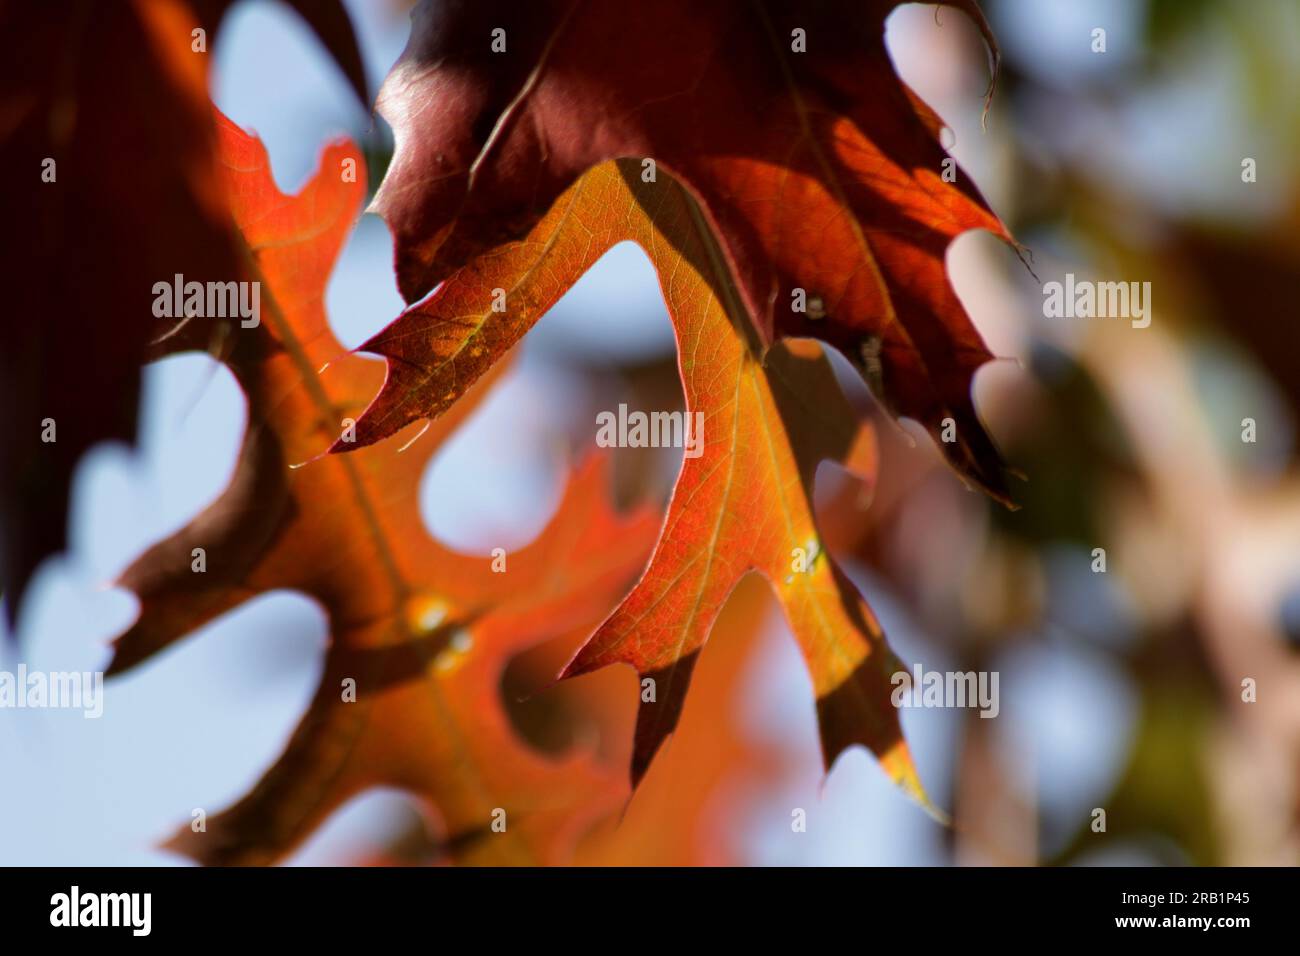 A close-up of Fall Leaves Stock Photo